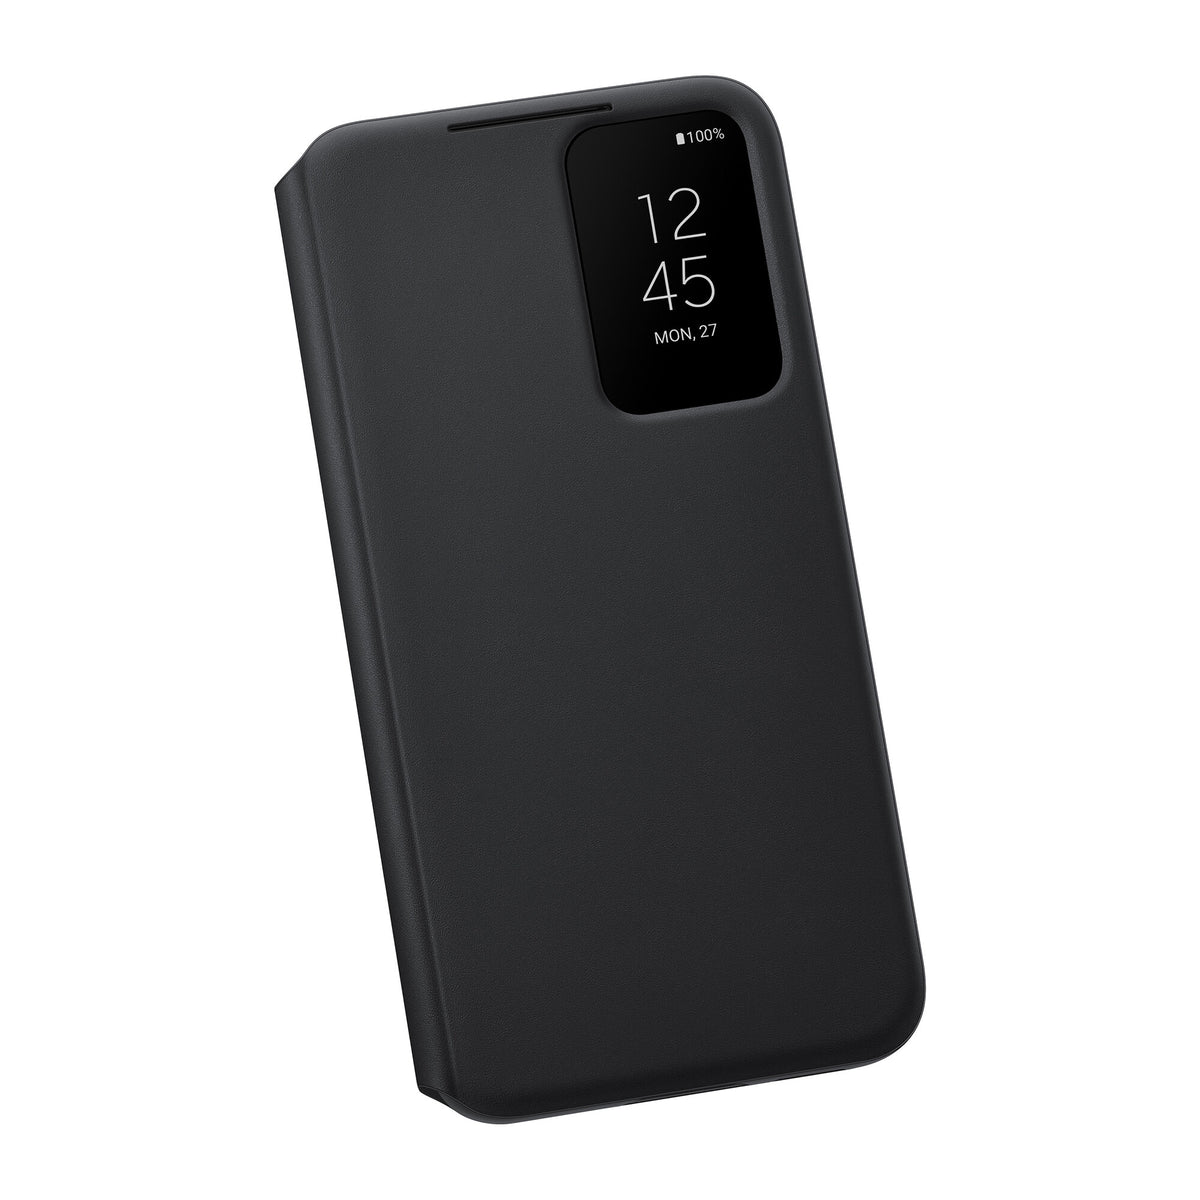 Samsung mobile phone flip case for Galaxy S22 in Graphite